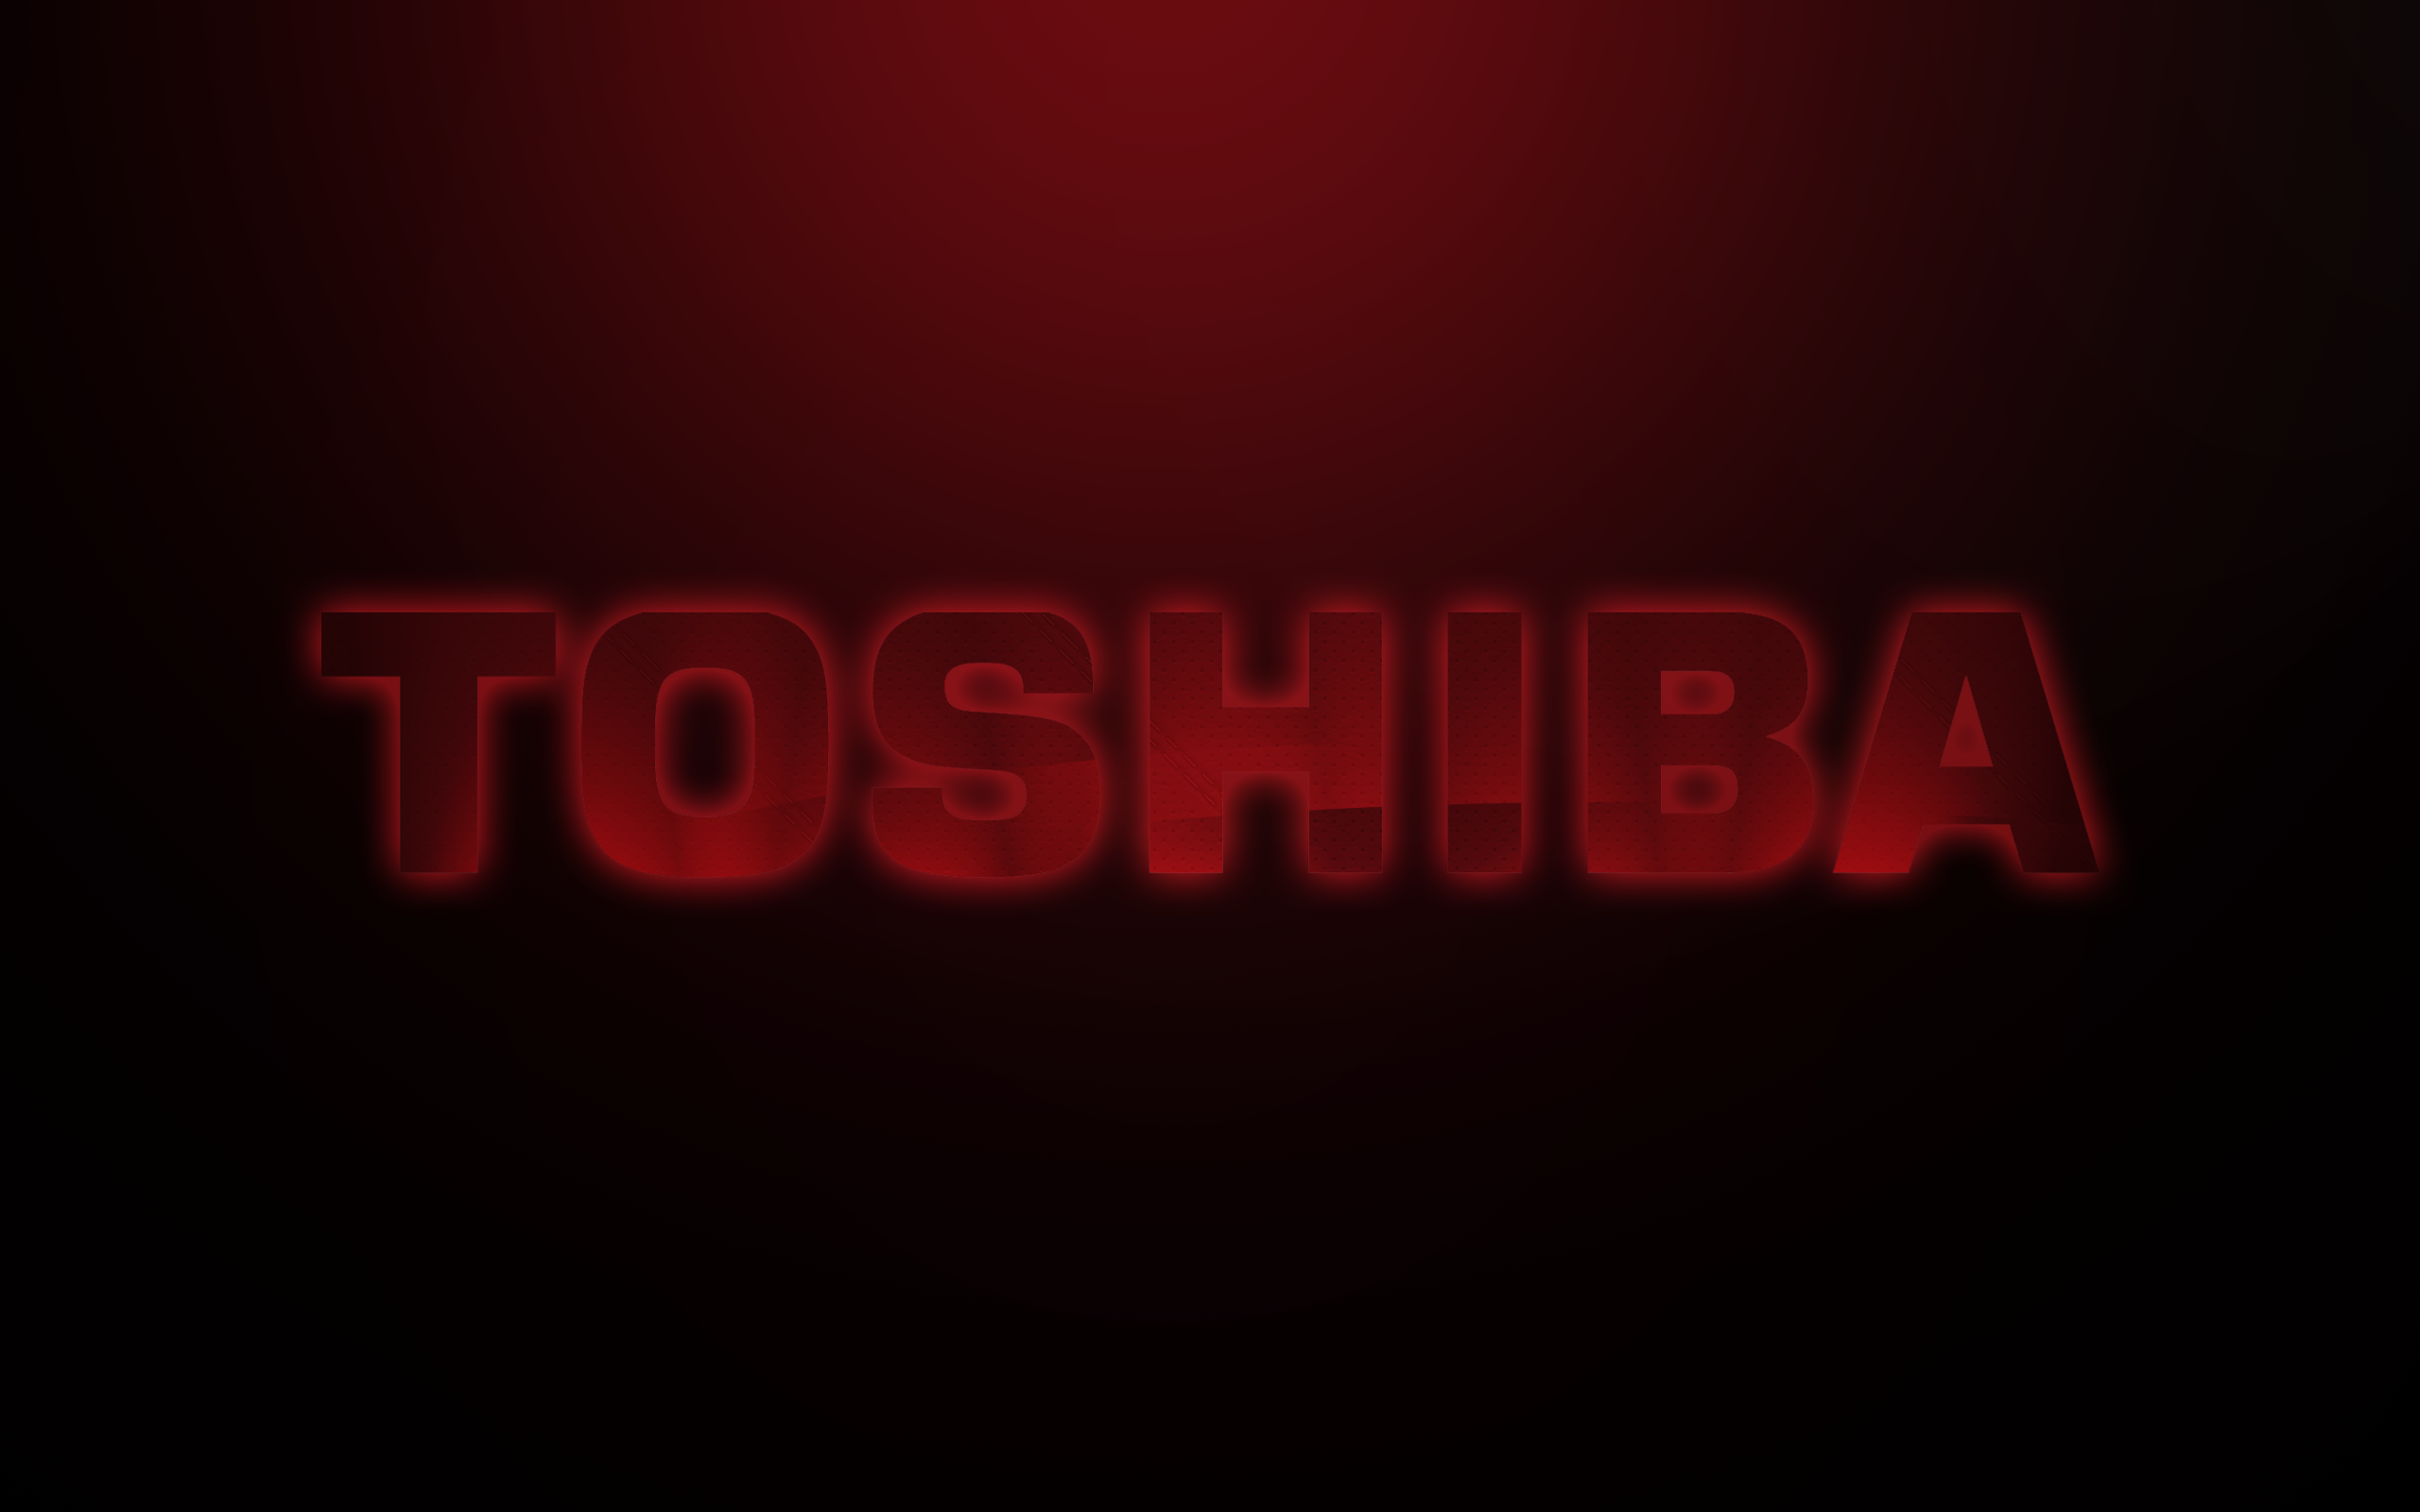 Toshiba Backgrounds Pictures - Wallpaper Cave